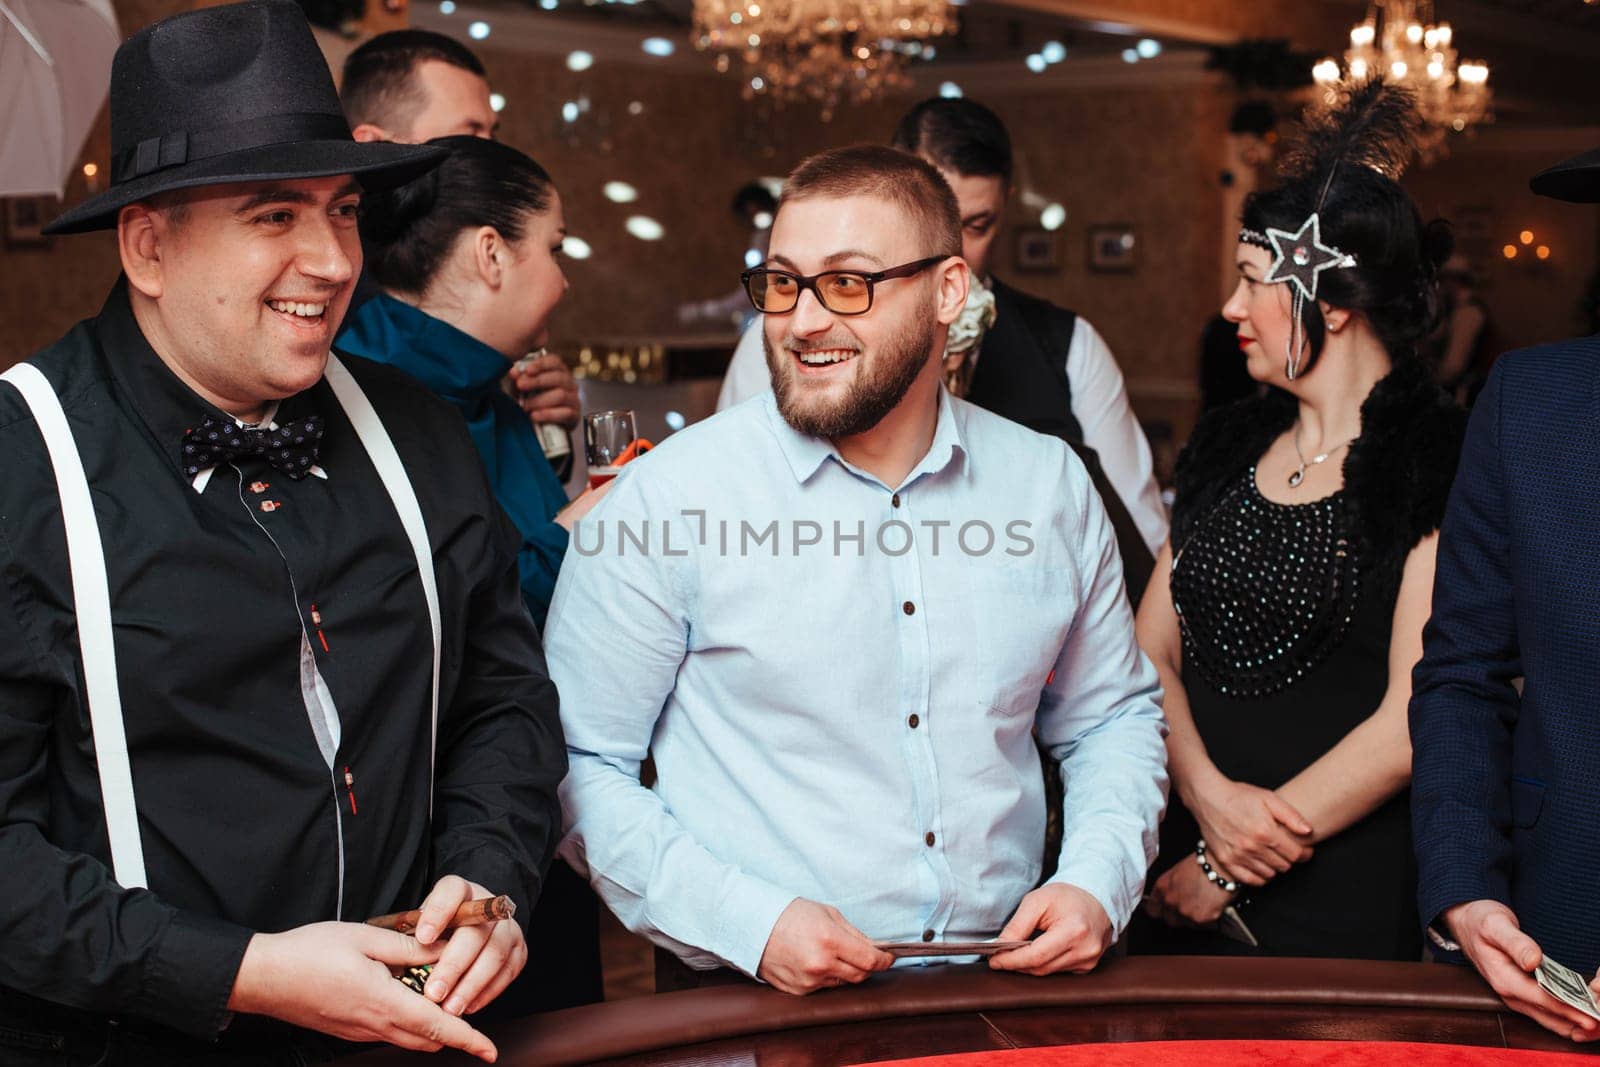 A group of people play in the casino on roulette Yaremche, Bukovel, Ukraine - January 10, 2022 by malyshph